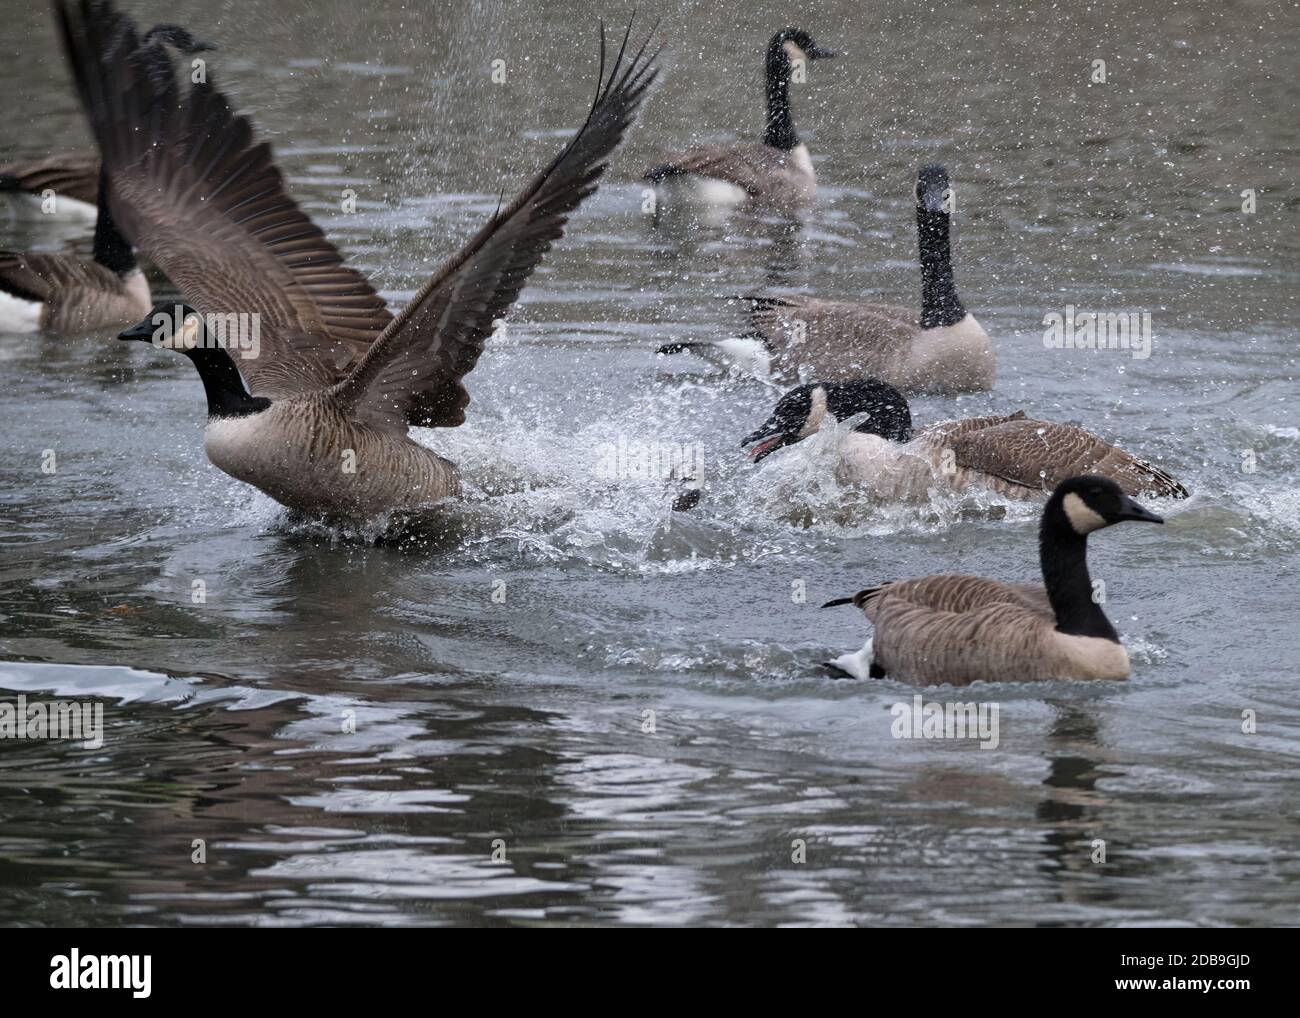 a Canada Goose (Branta canadensis) part of a flock chasing another on lake water, creating large splash of water Stock Photo